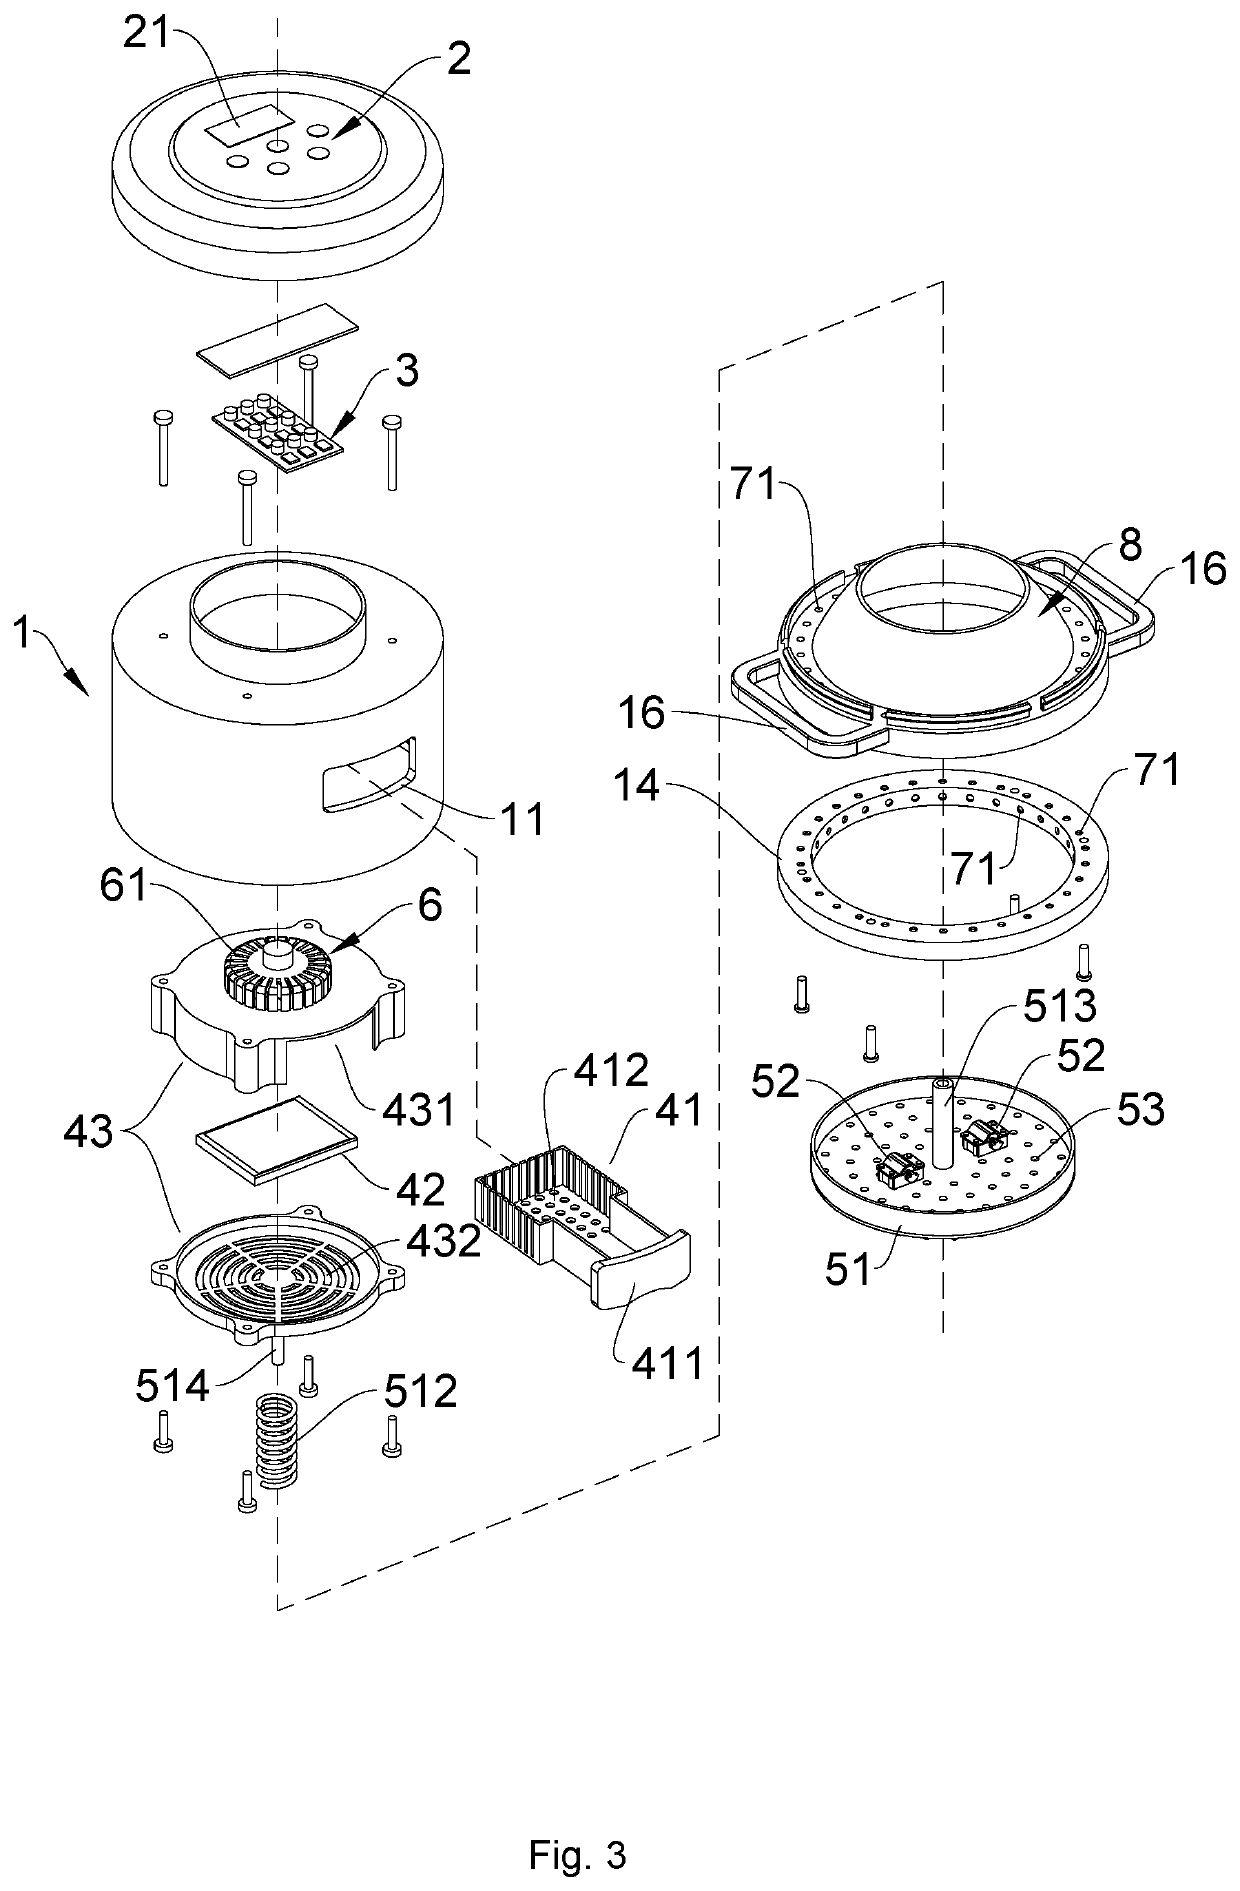 Ultrasonic medicine application device that strongly promotes medicine absorption